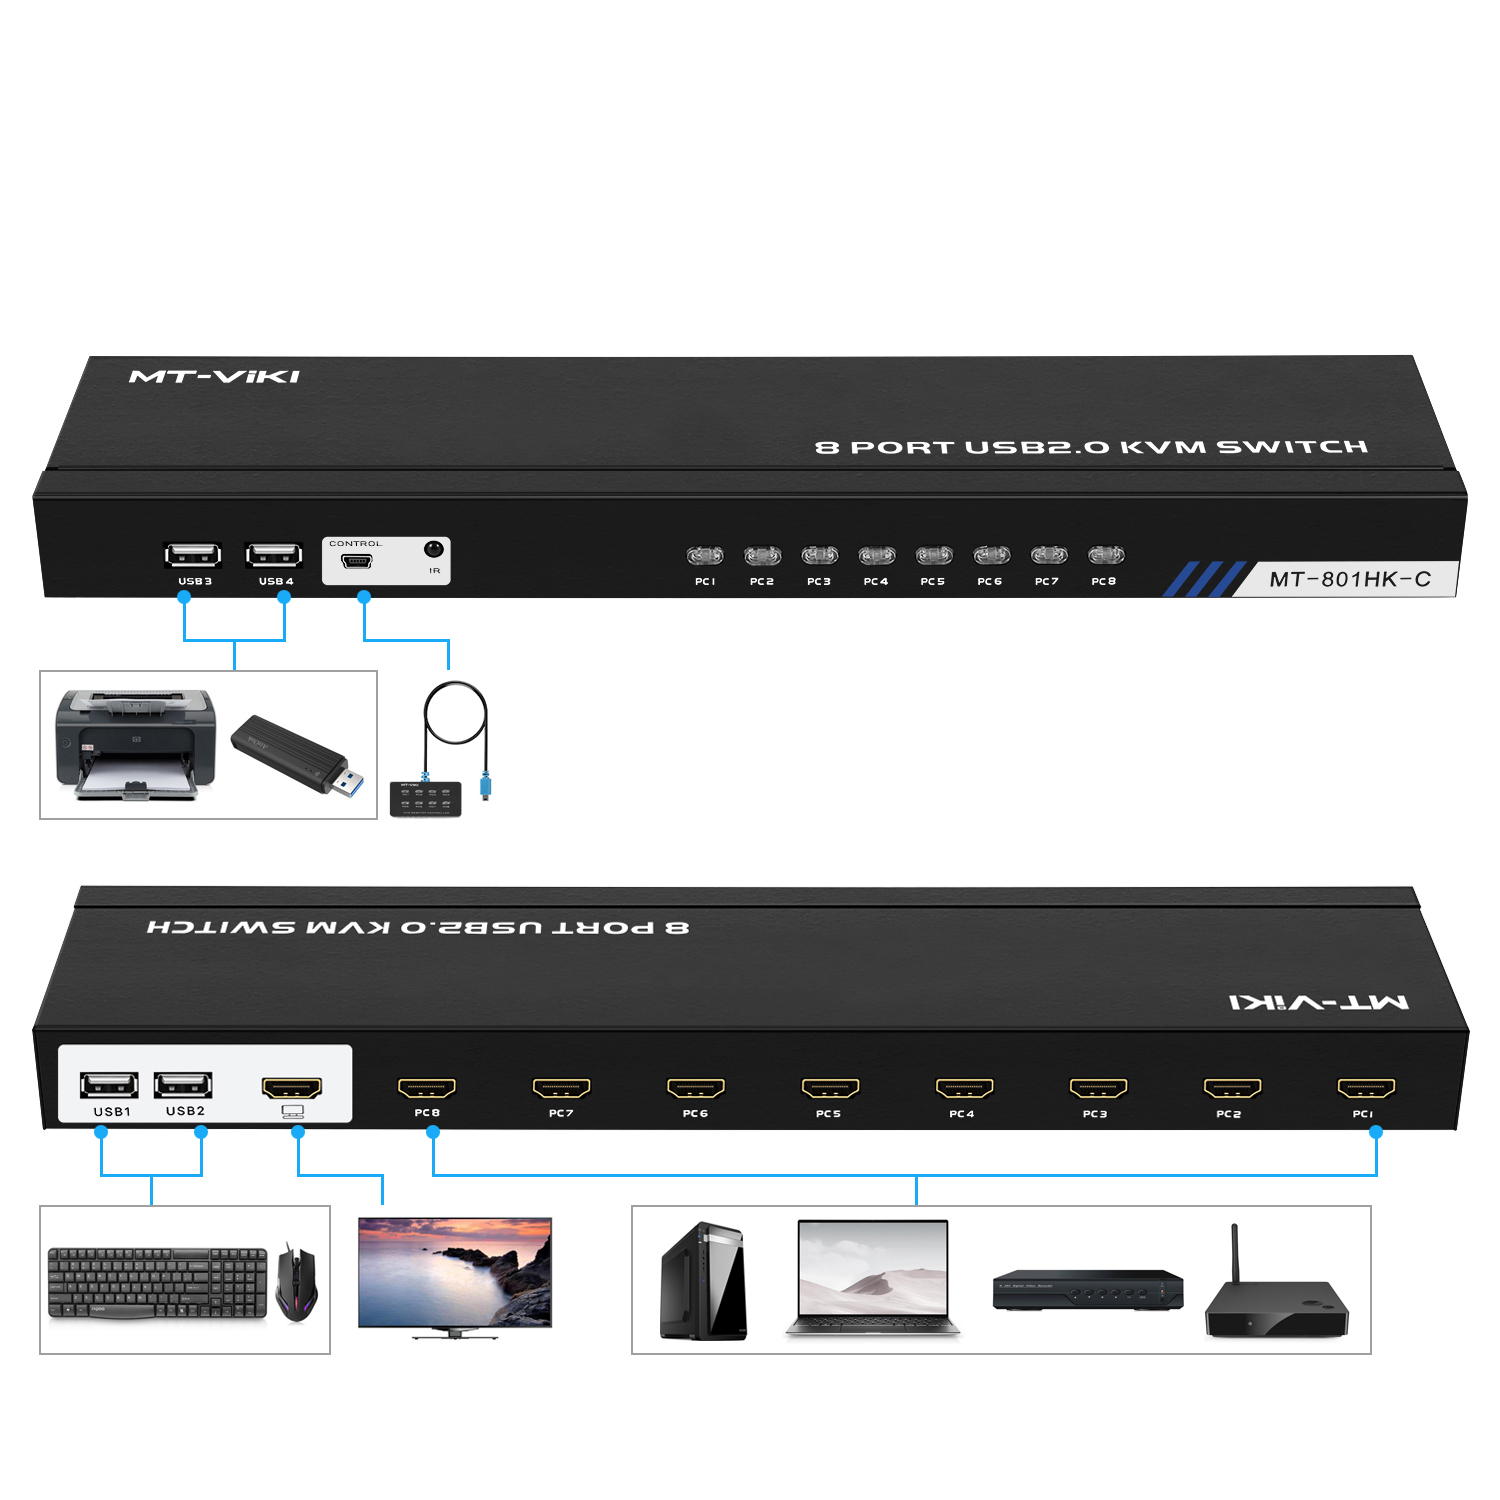 Maximize Productivity - Our 8 port HDMI KVM Switch or USB and HDMI switch boasts 8 HDMI and 4 USB ports, a power-packed combination to help you control and manage multiple computers efficiently